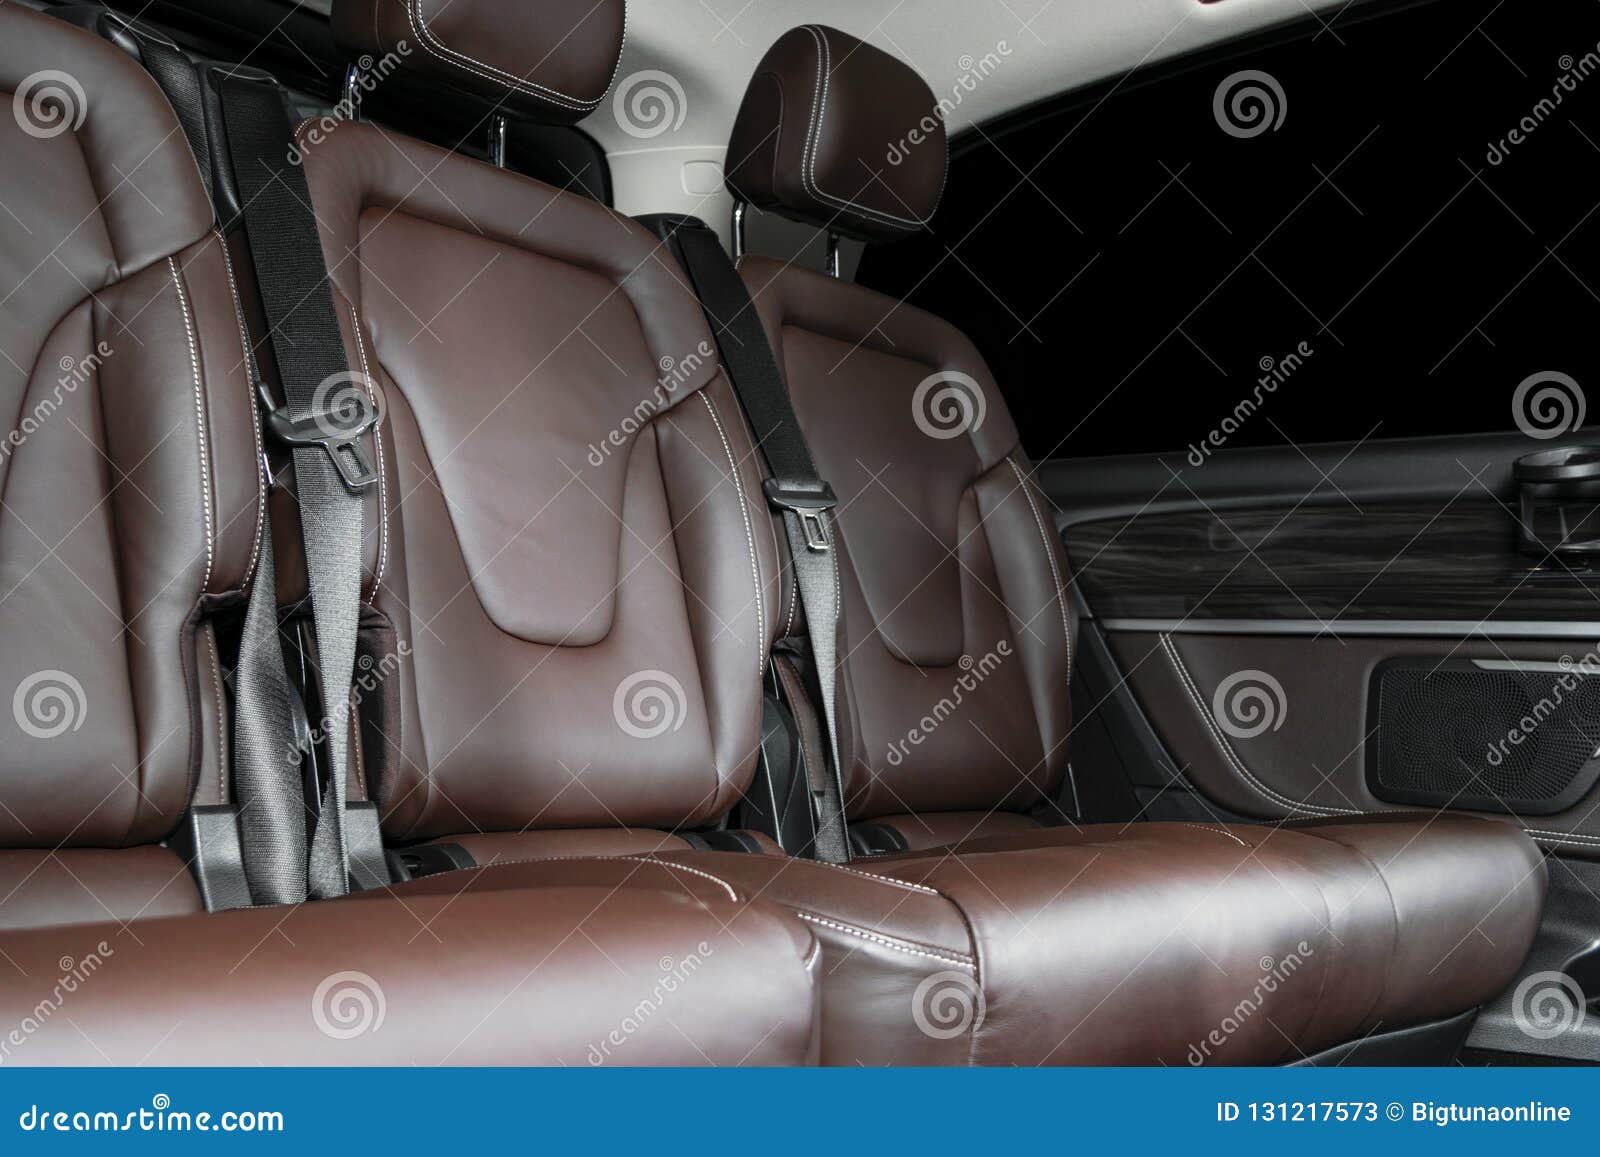 Back Passenger Seats In Modern Luxury Car Frontal View